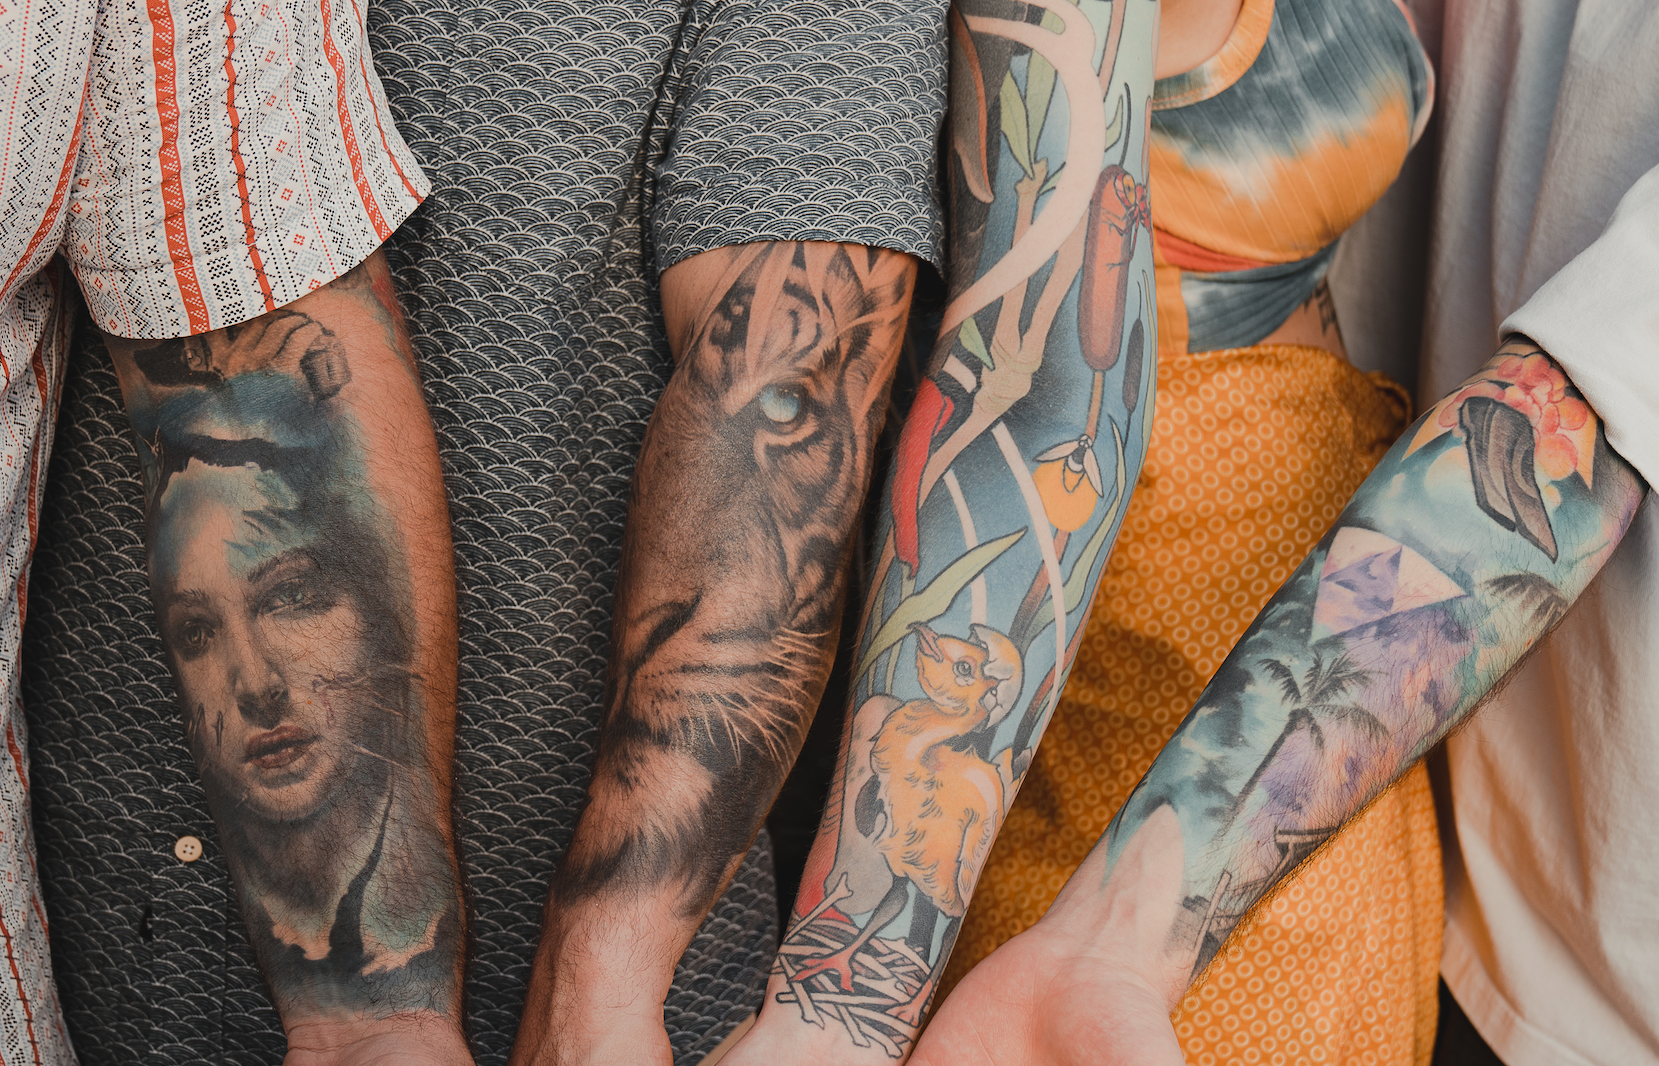 Tattoo Sleeves: Types, Aftercare & More - Sorry Mom